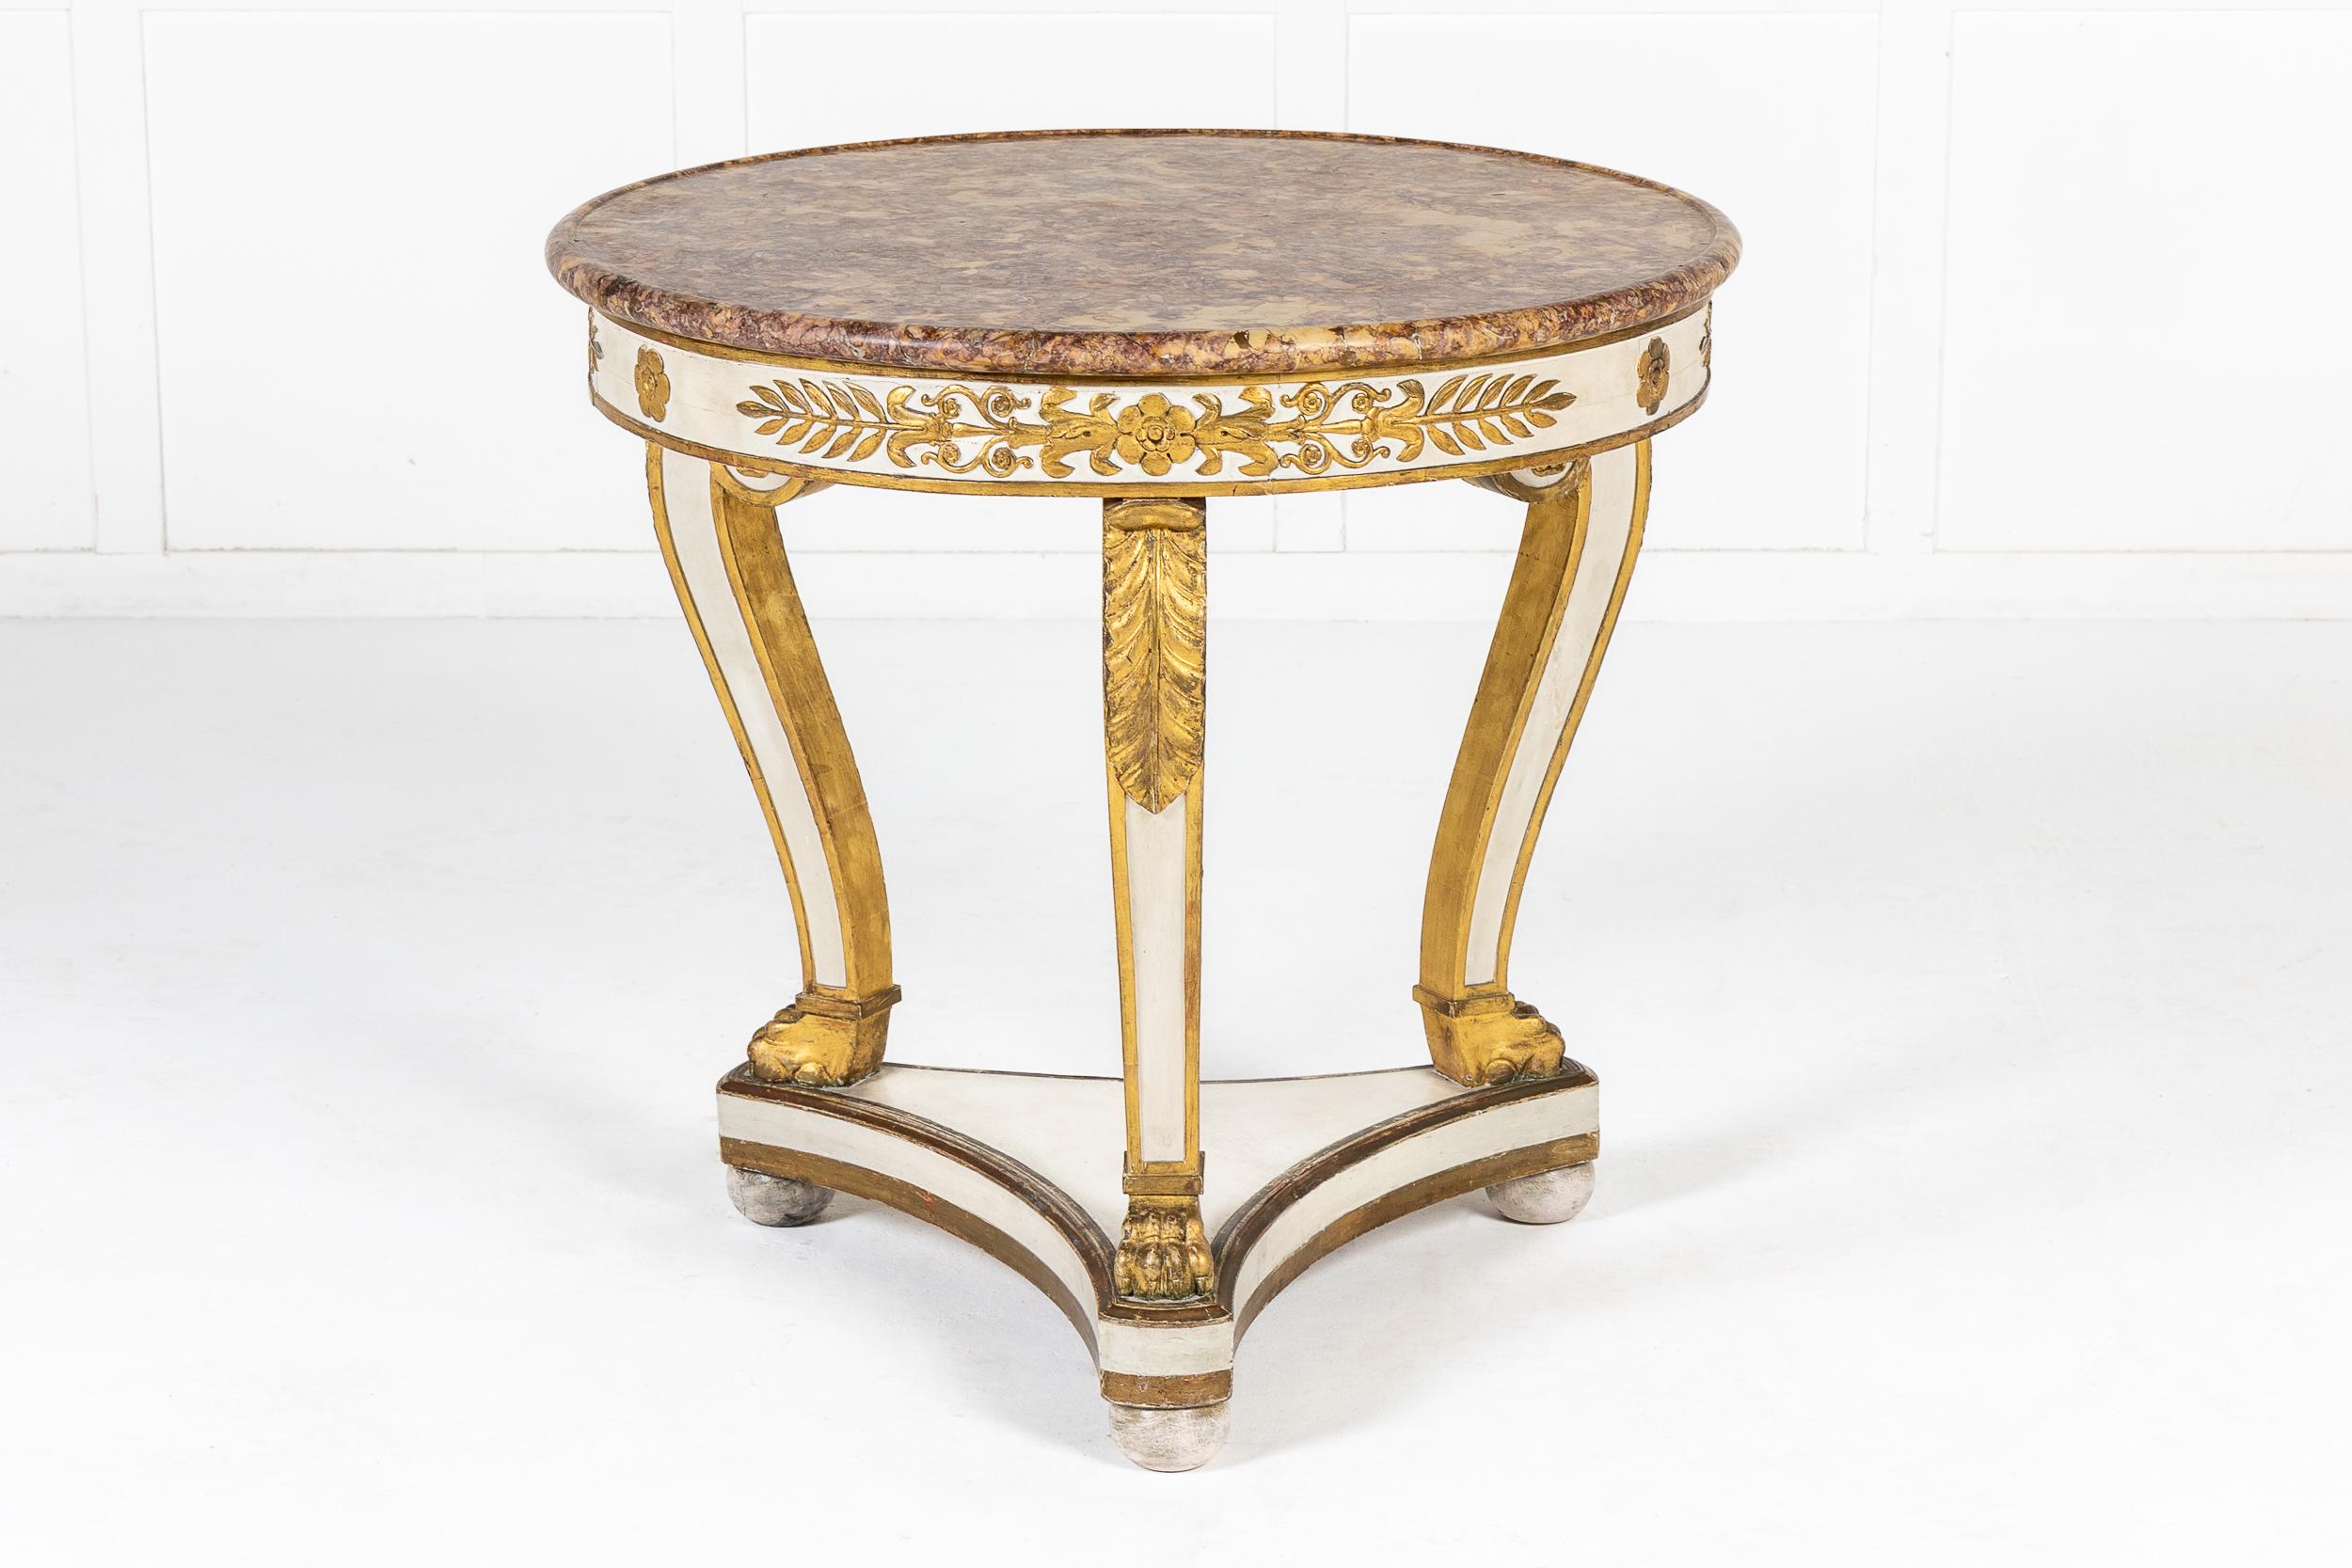 An Early 19th Century French White Painted and Gilt Guéridon, with Fine and Original Marble Top.

The fine marble top supported on a white painted frieze with parcel gilt decorative details of typical Empire type and very fine quality. These details